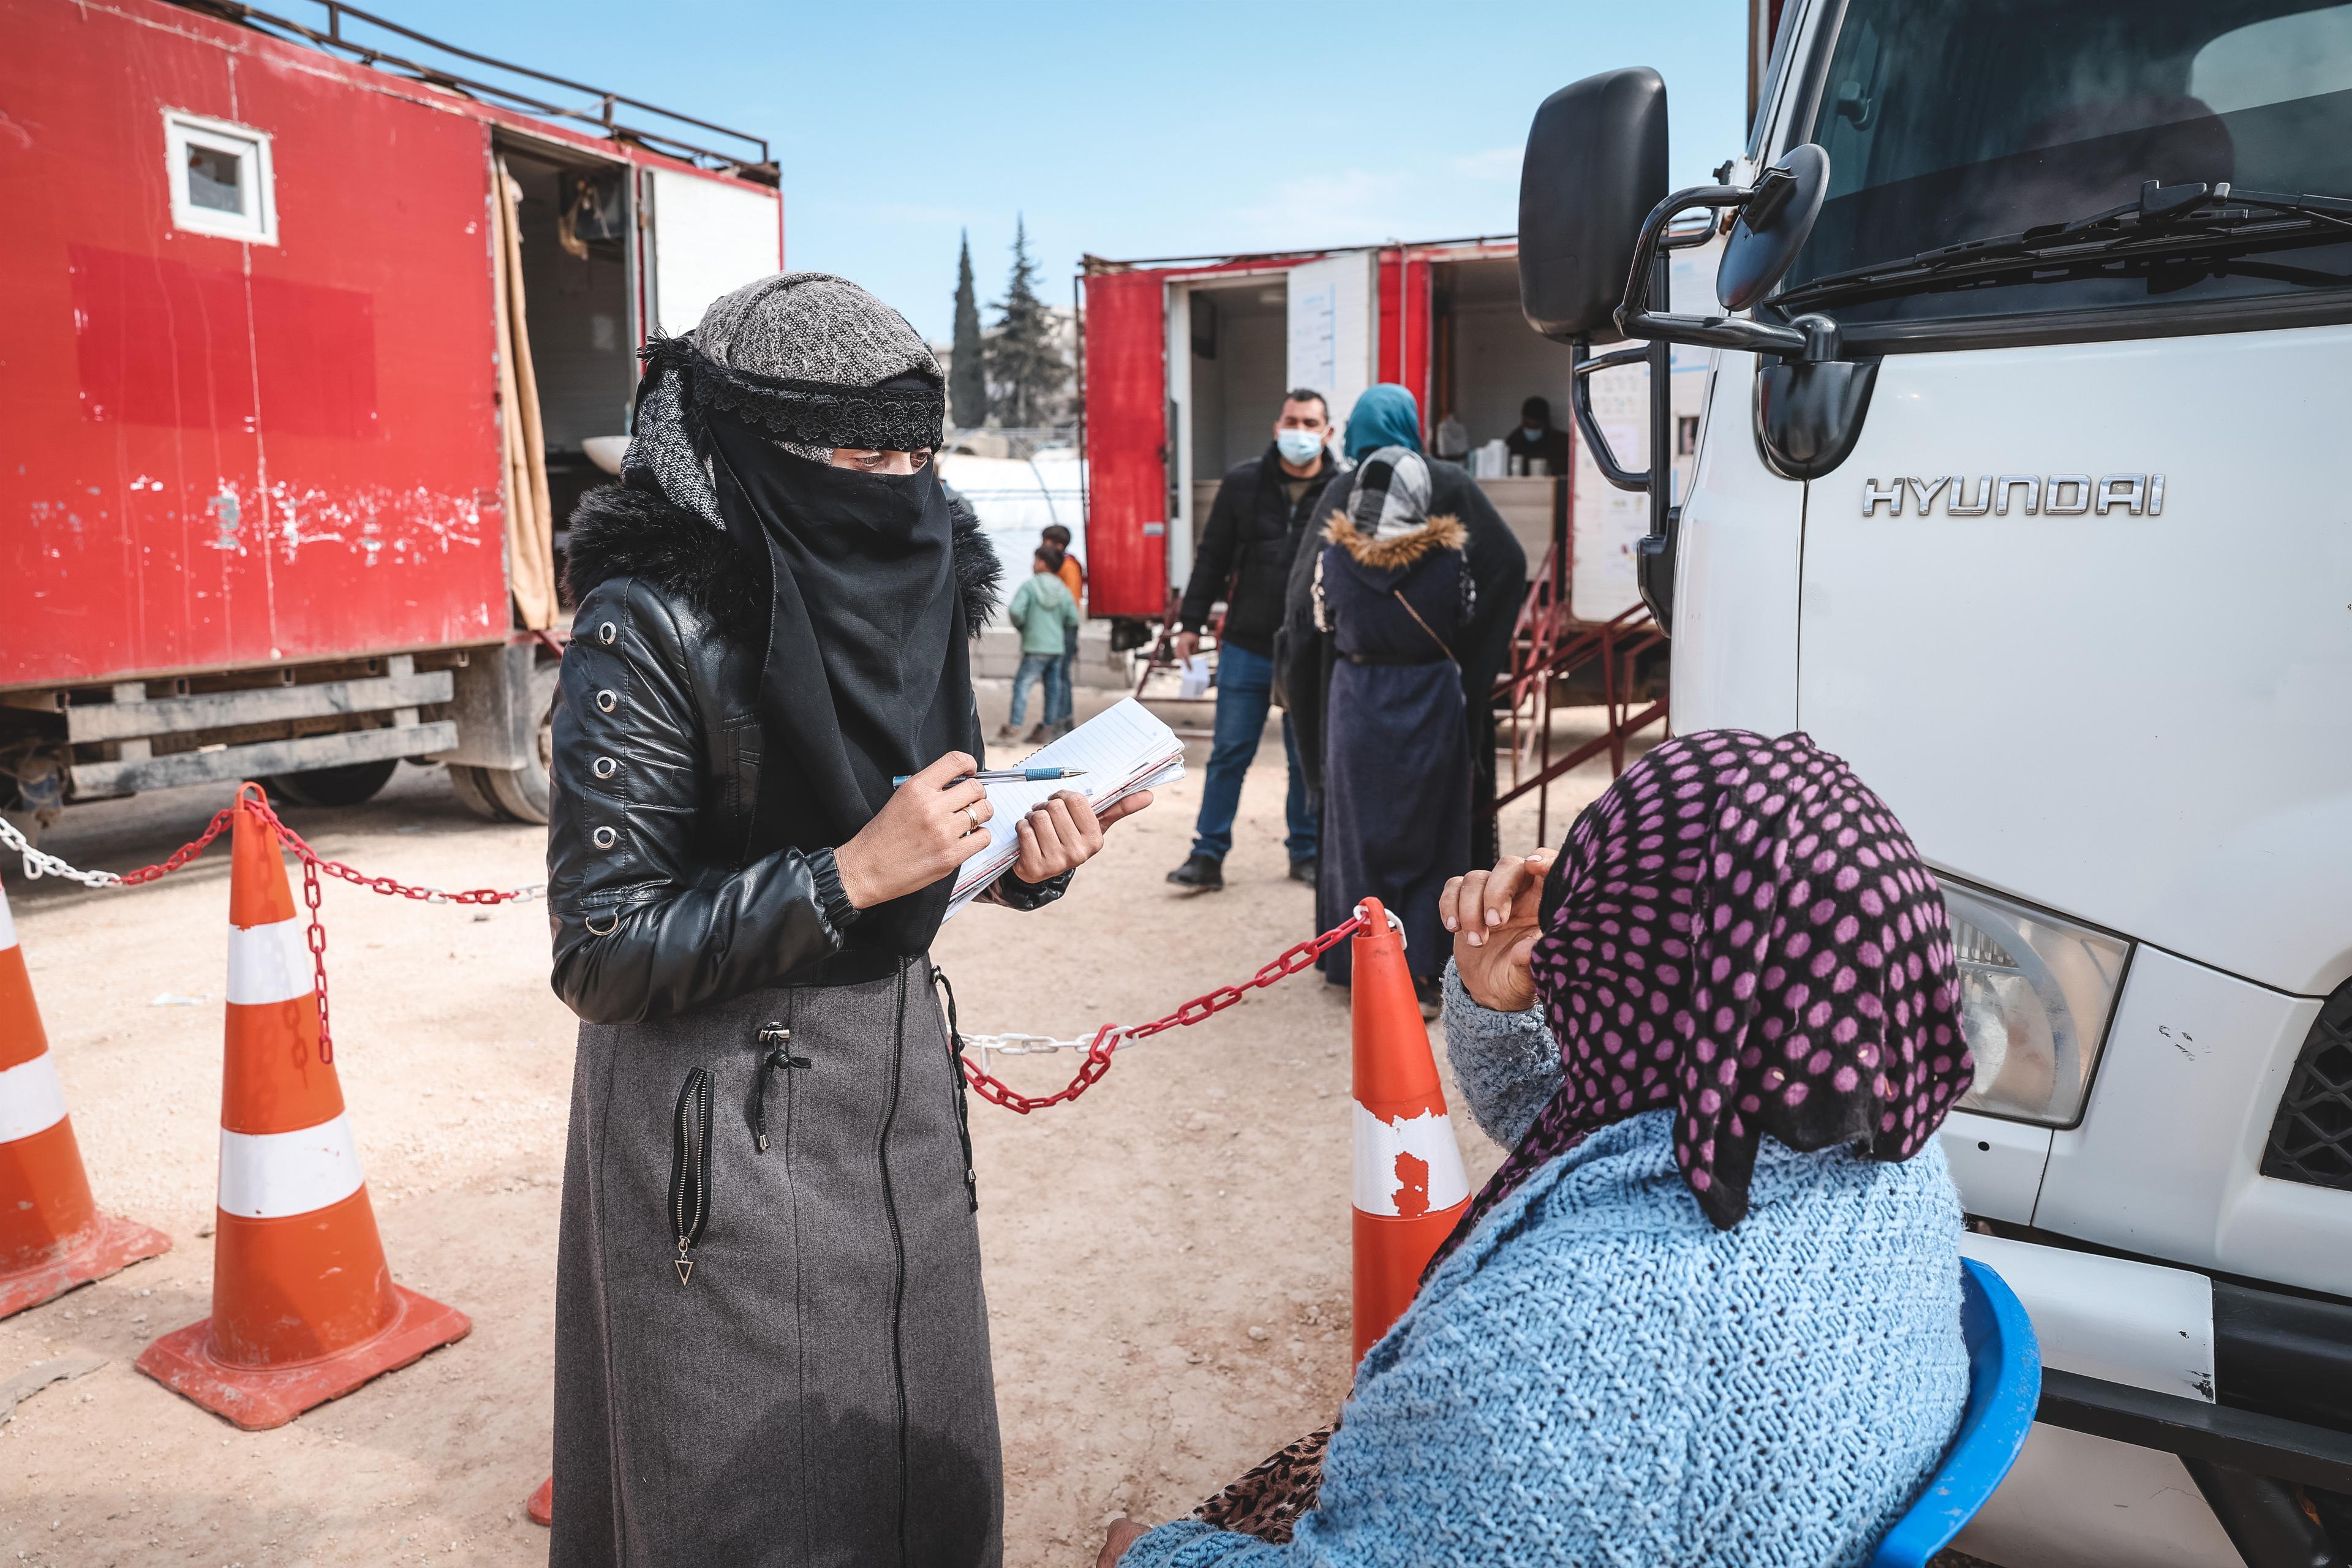 The clinics provide medical care in a temporary accommodation camp in the town of Salqin (Idlib, Syria) on the Turkish border for people affected by the earthquake that struck the region on 6 February. 